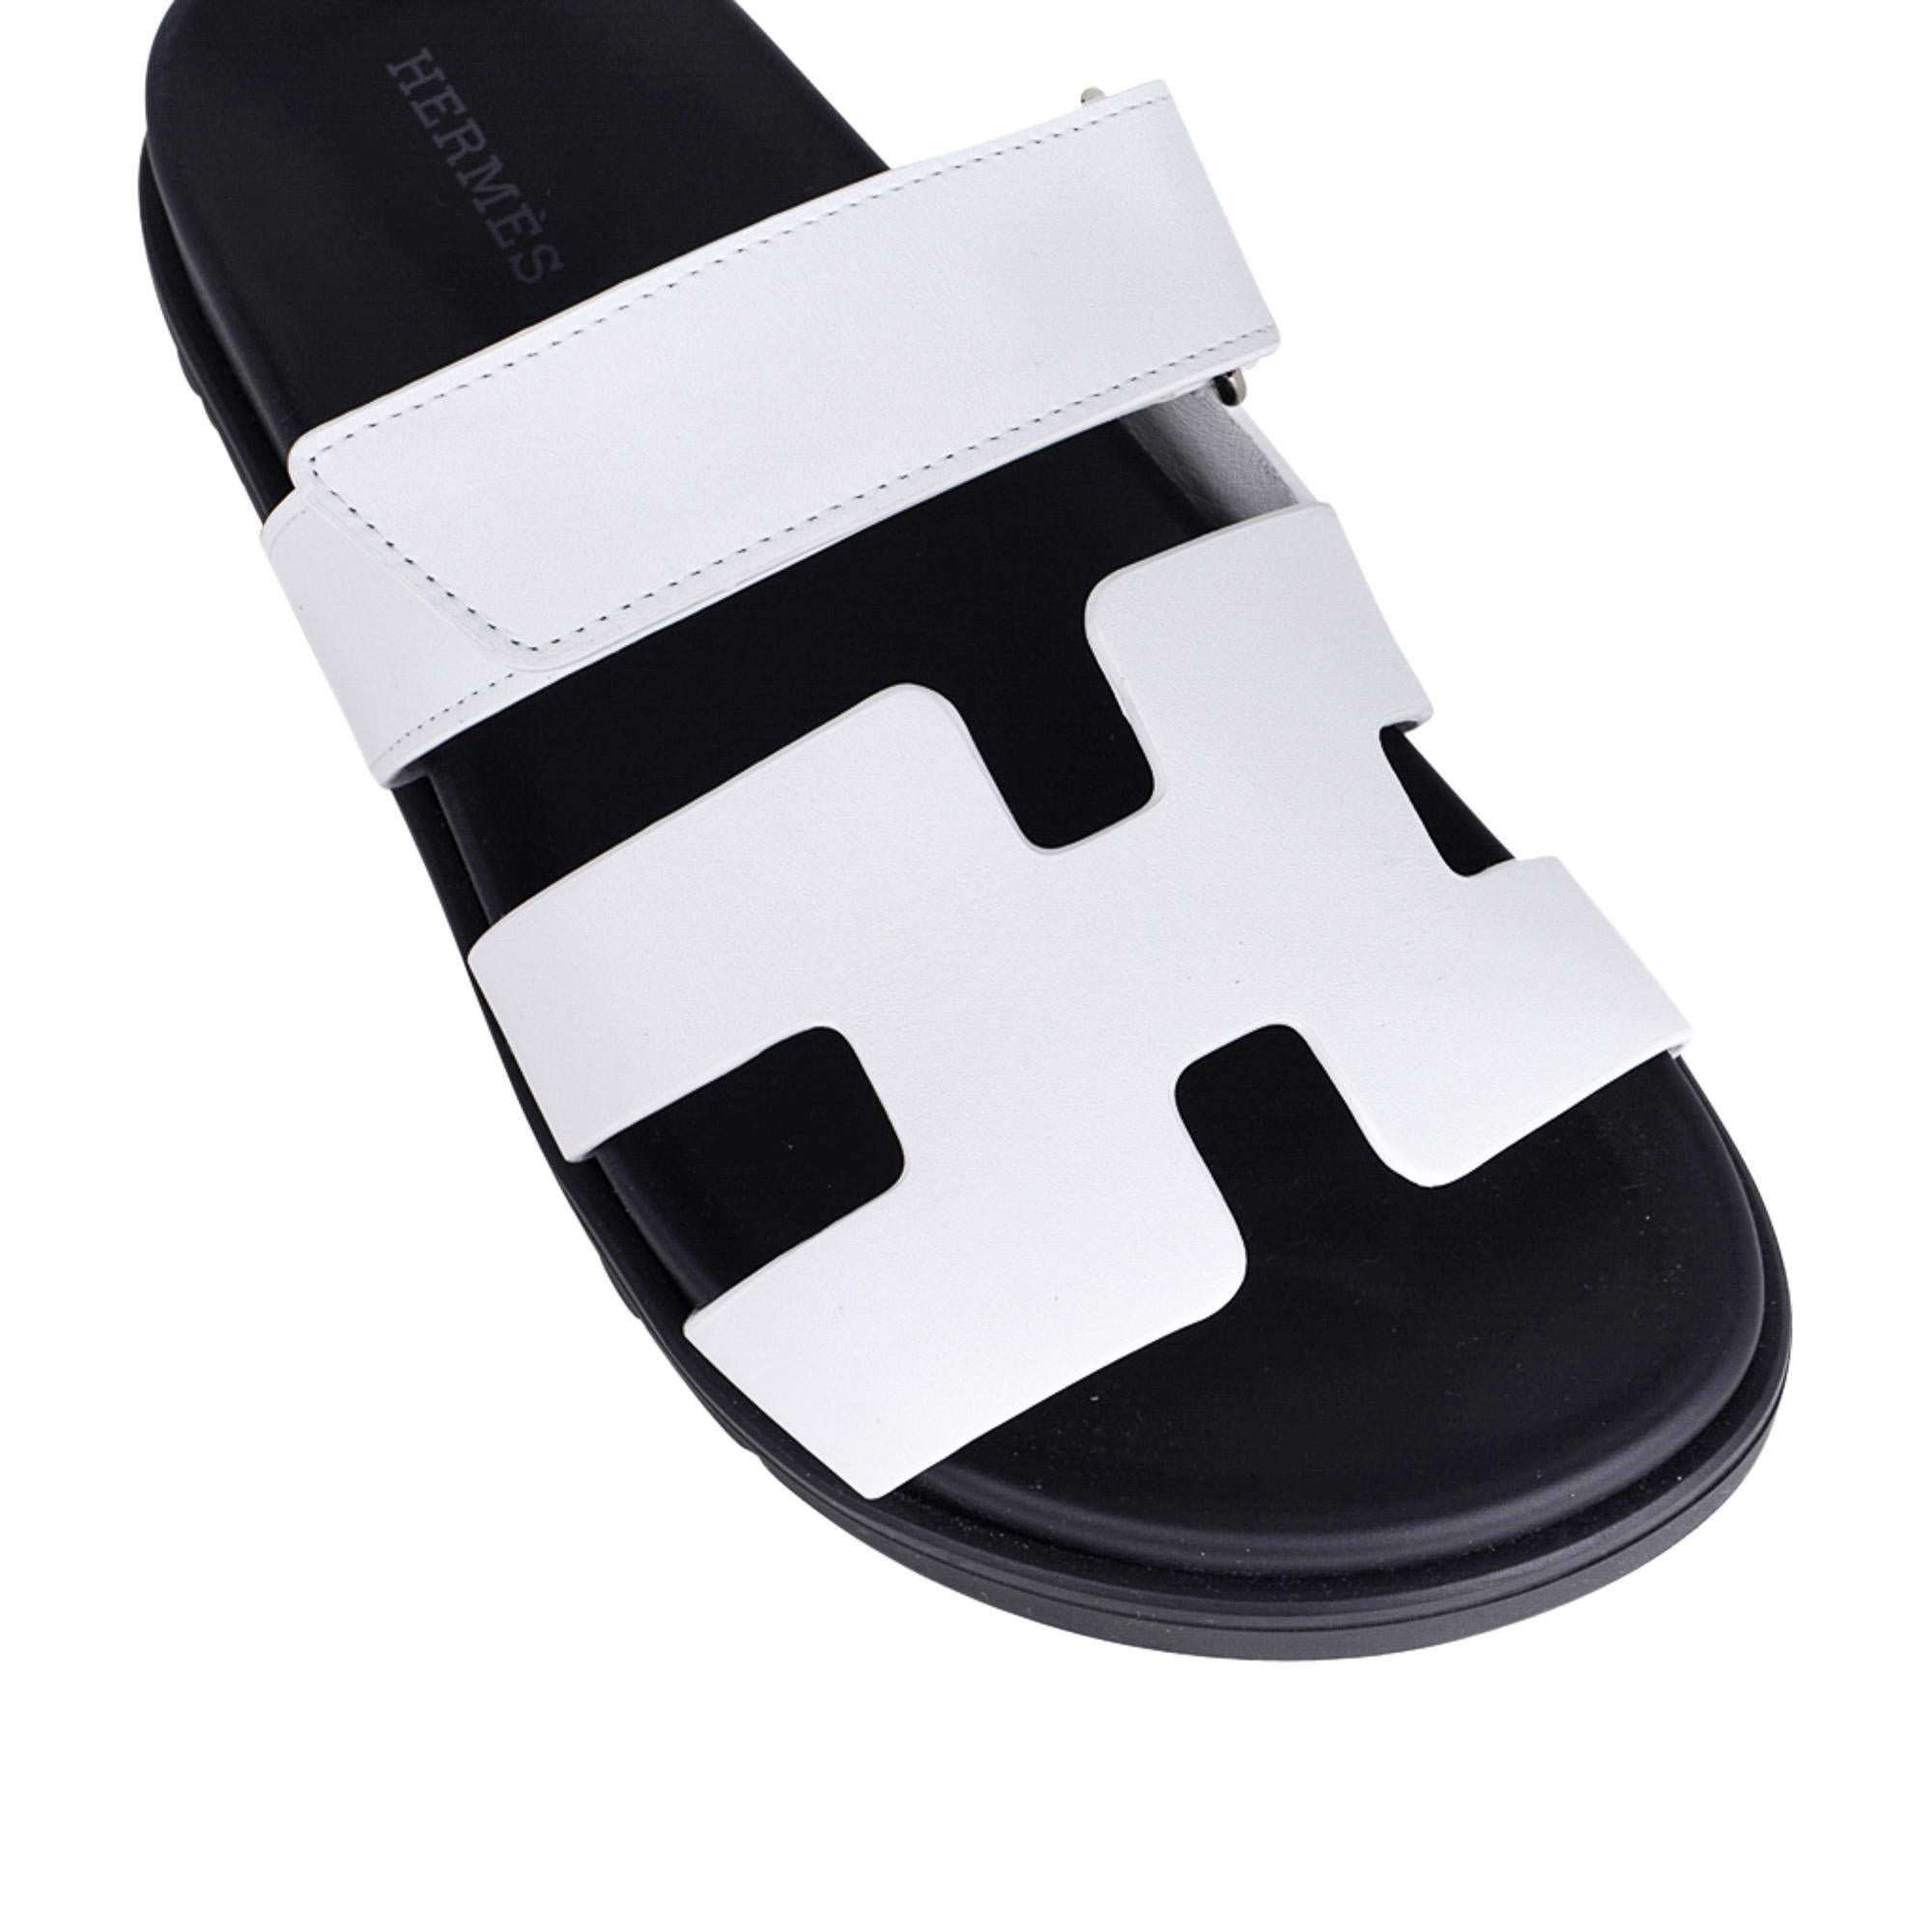 Mightychic offers a limited edition Hermes Chypre Sandal featured in White.
Calfskin with black anatomical insole and H embossed Black rubber sole.
Strap across foot is adjustable with velcro closure.
Comes with sleepers and and signature Hermes